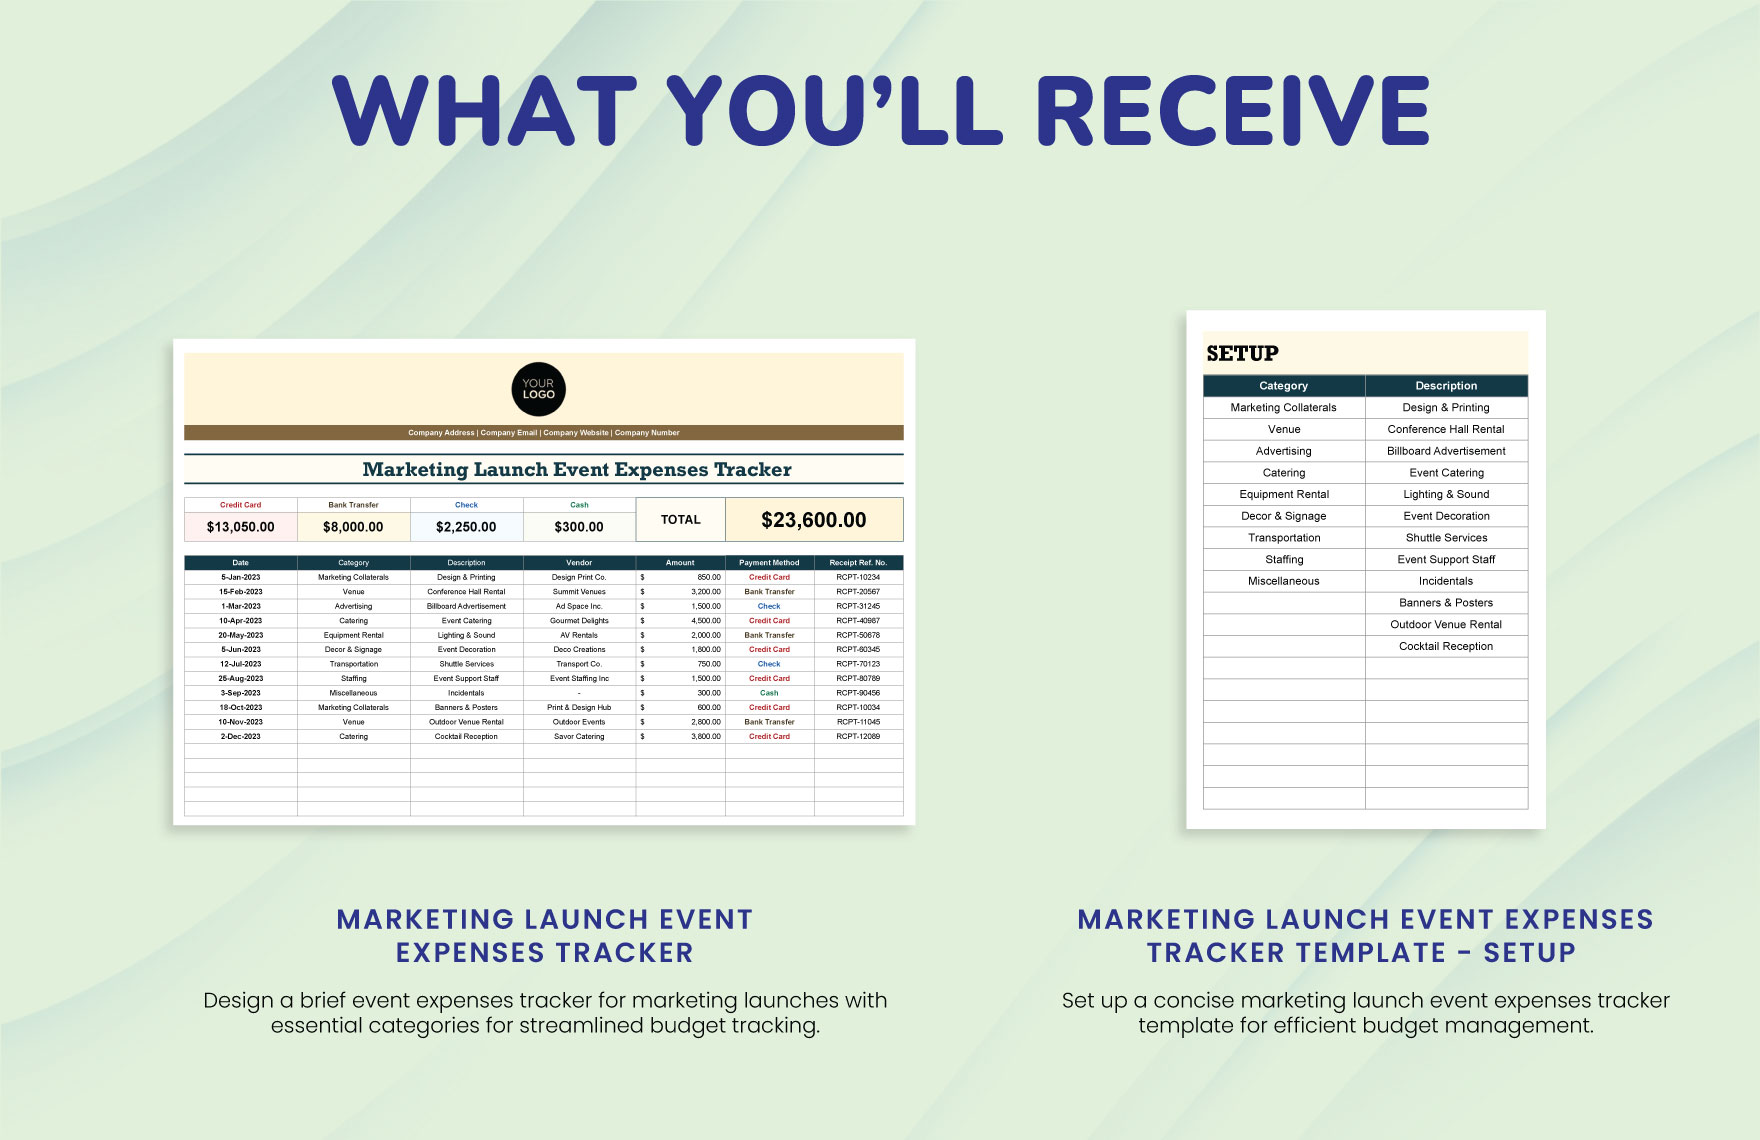 Marketing Launch Event Expenses Tracker Template